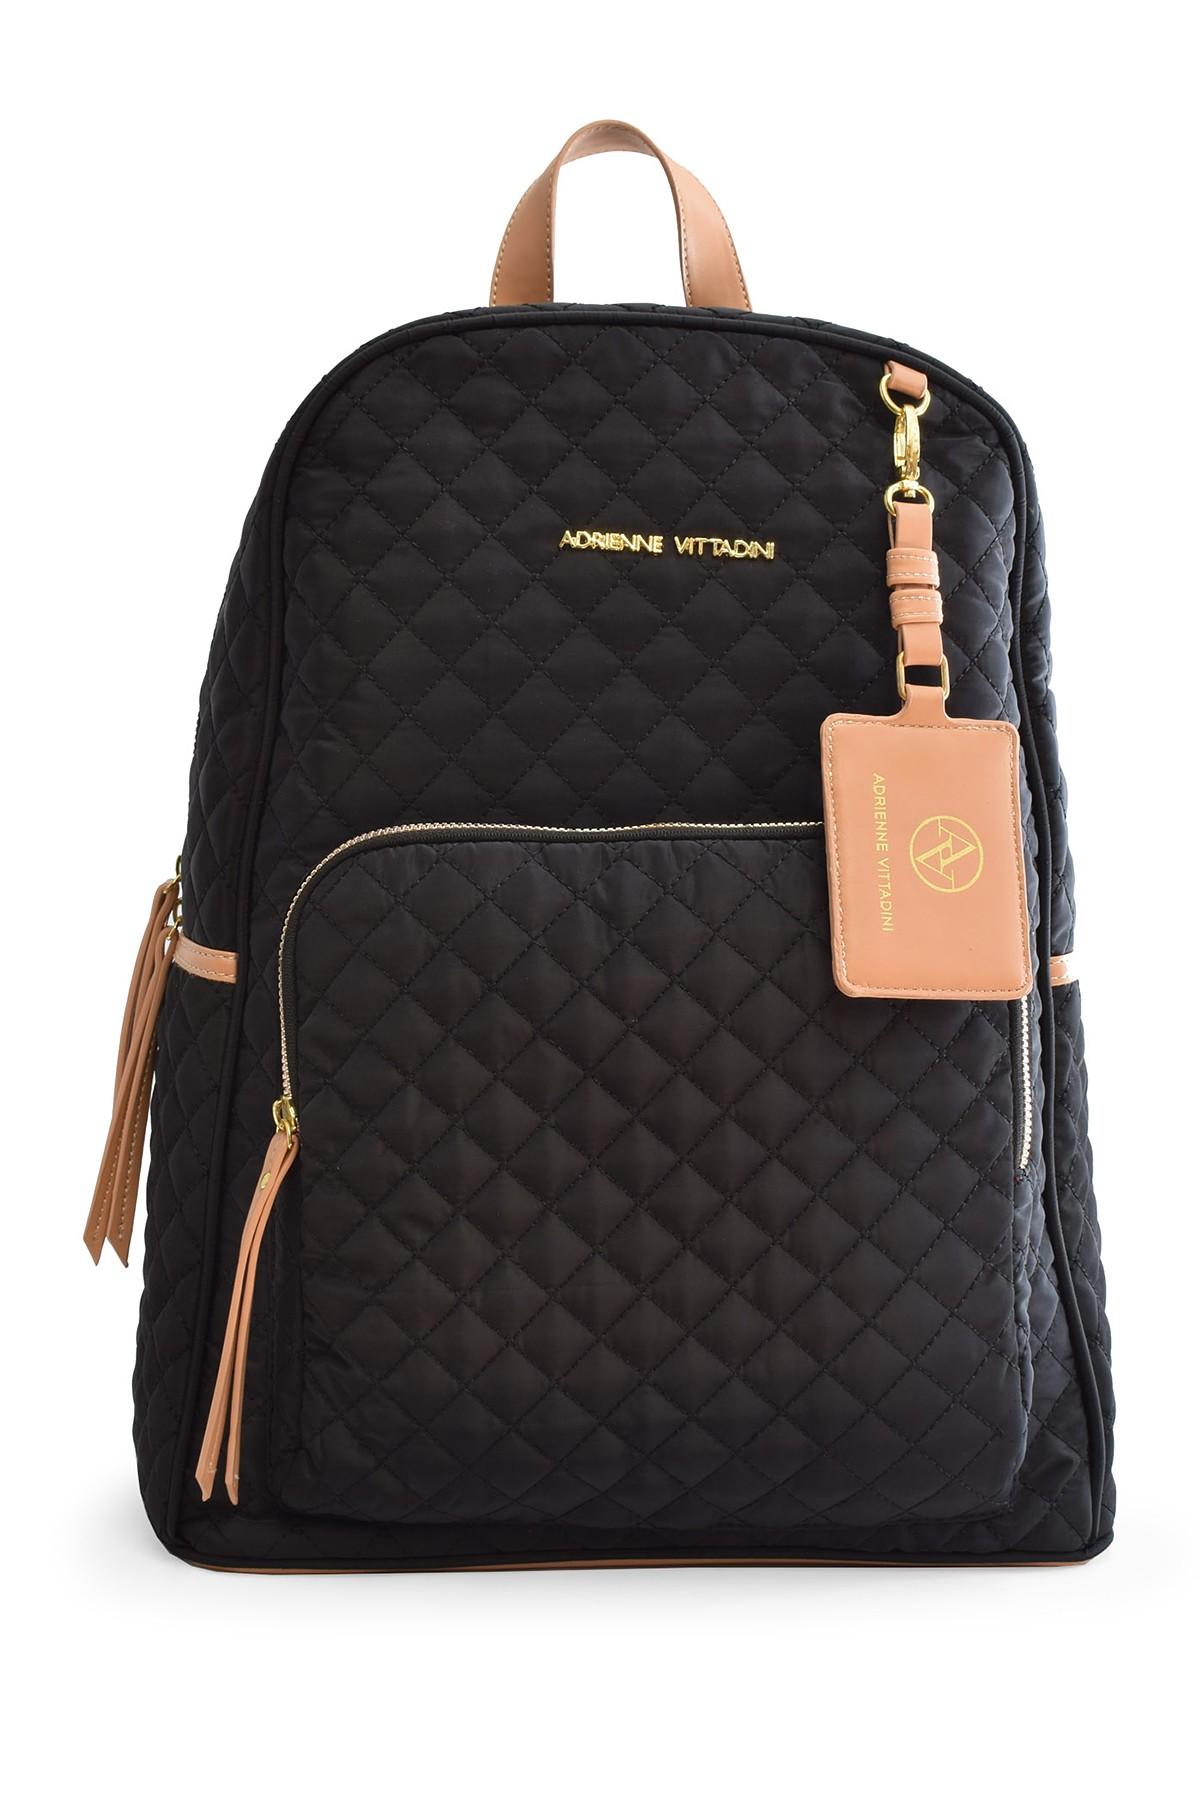 Adrienne Vittadini Quilted Backpack in Black | Lyst